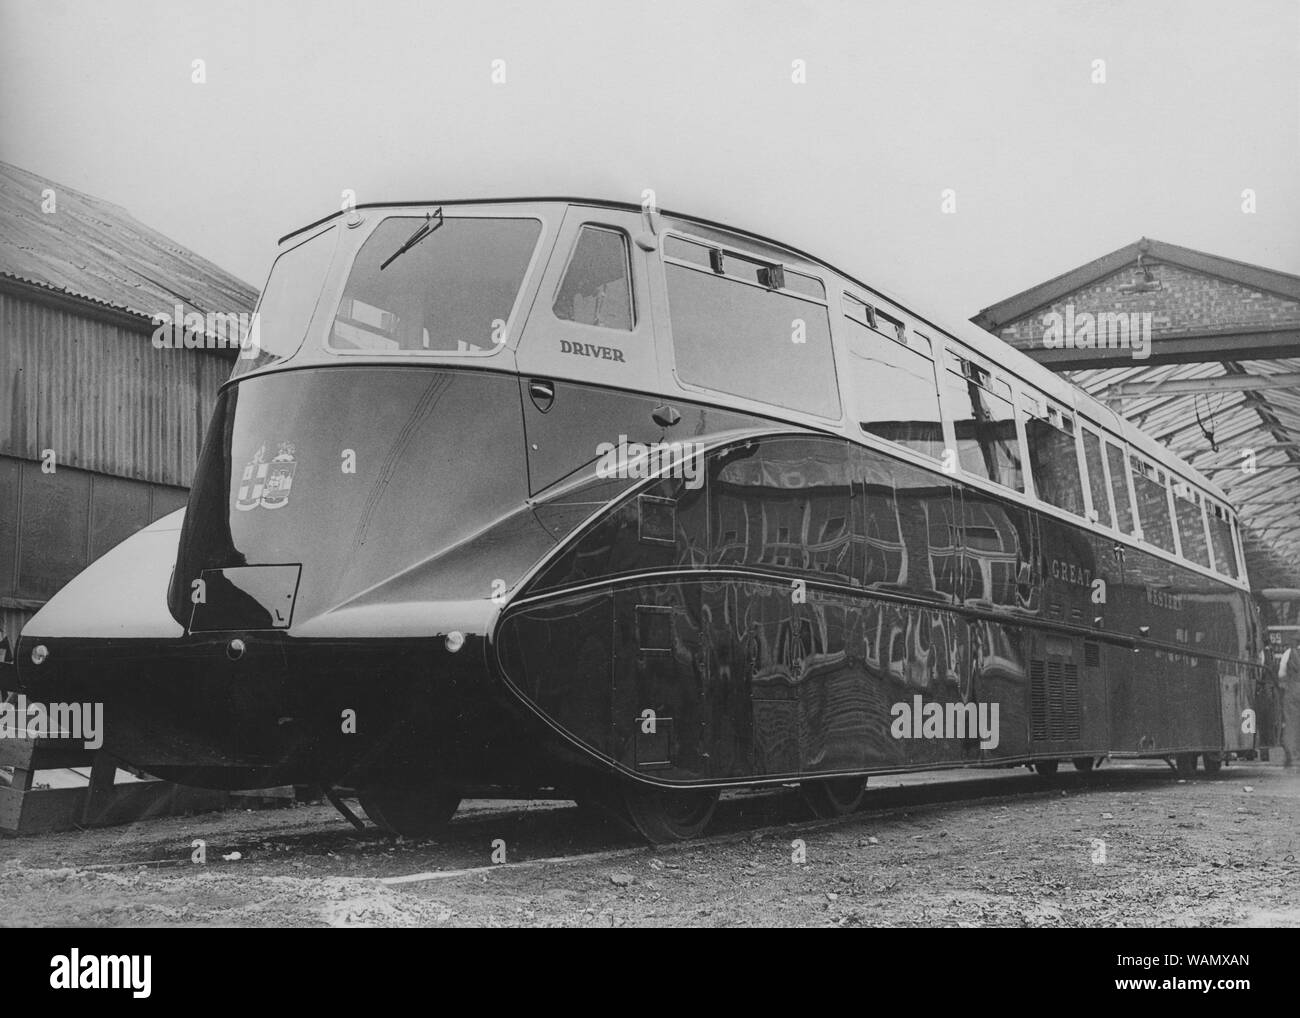 Streamline train. Englands first streamline train, a Express Diesel Engine Rail Car, beginning trafficing the line Reading and Slough operated by Great Western Railway G.W.R. The typical 1930s streamline design of the train is made to to reduce wind resistance. October 24 1933 Stock Photo